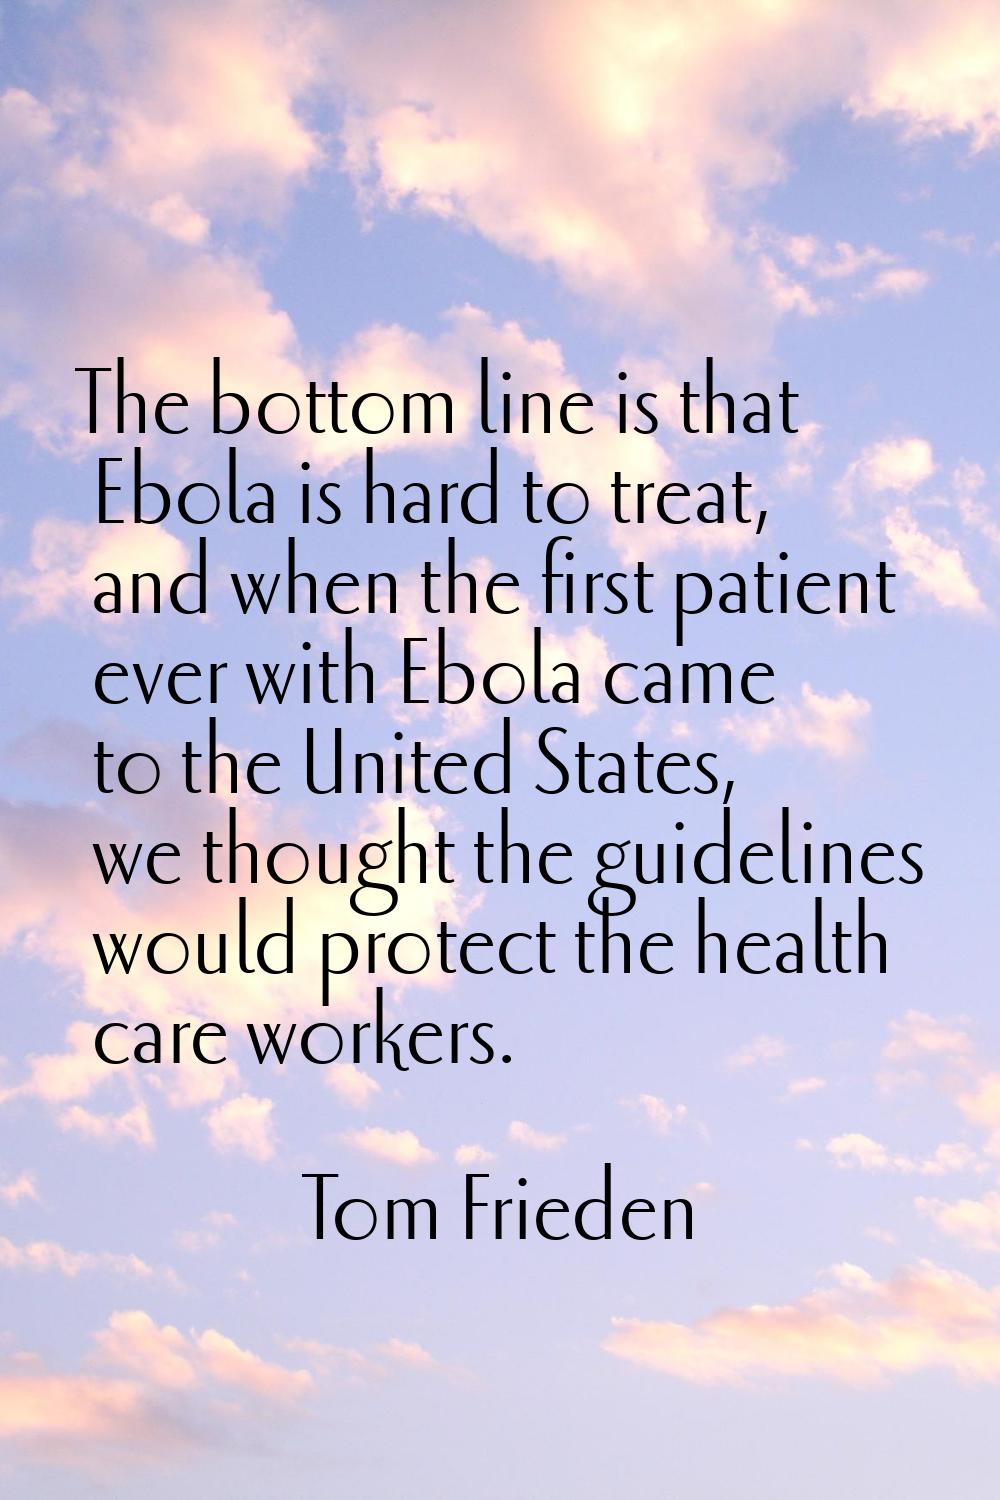 The bottom line is that Ebola is hard to treat, and when the first patient ever with Ebola came to 